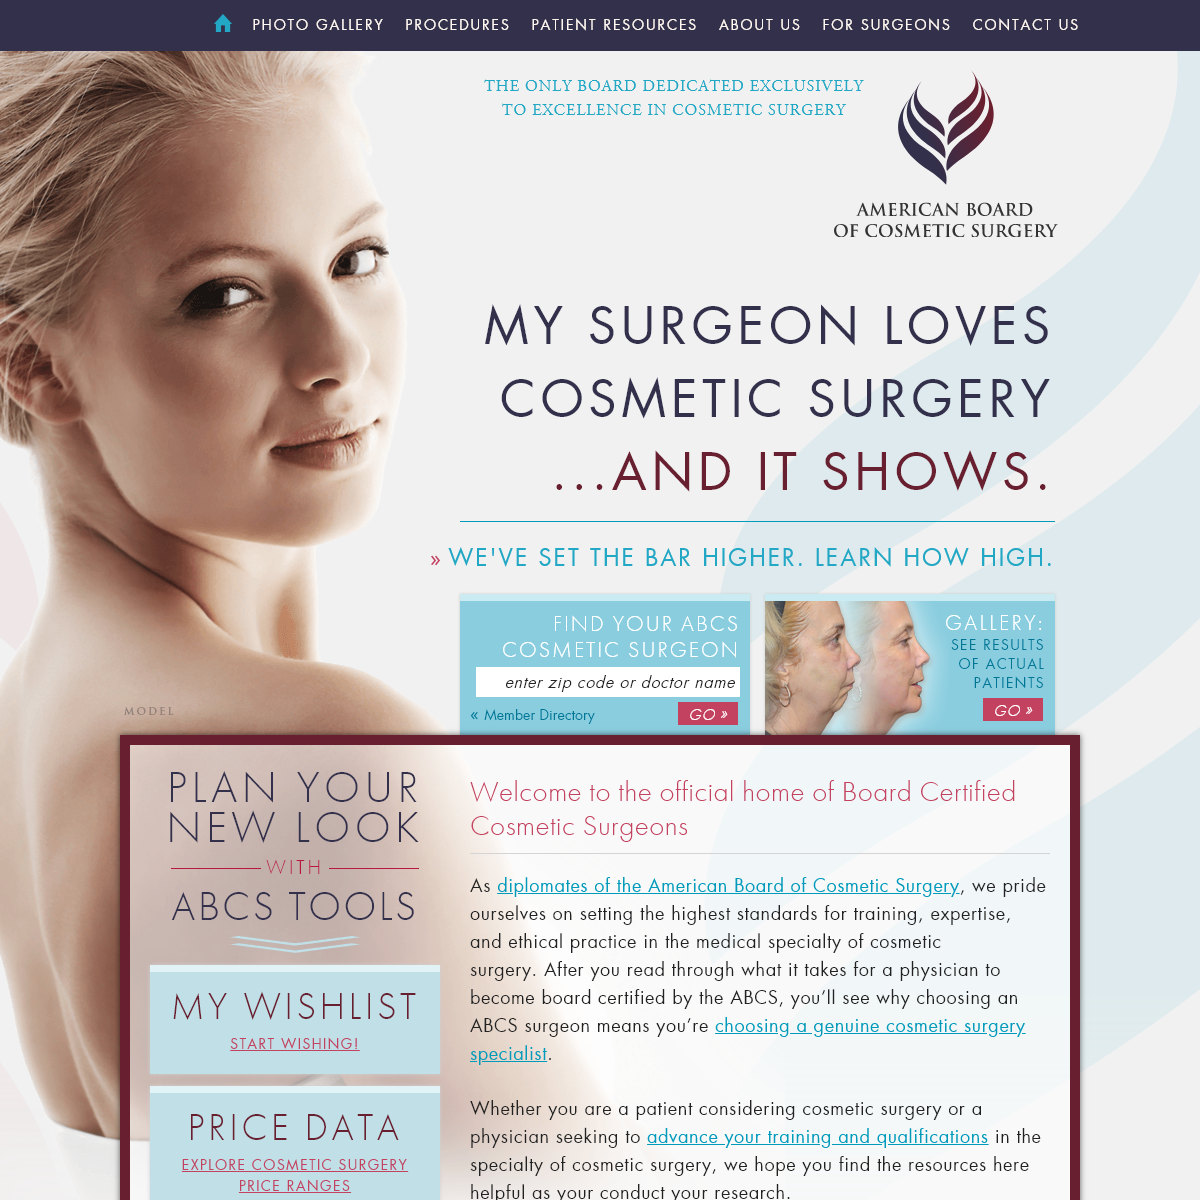 A complete backup of americanboardcosmeticsurgery.org